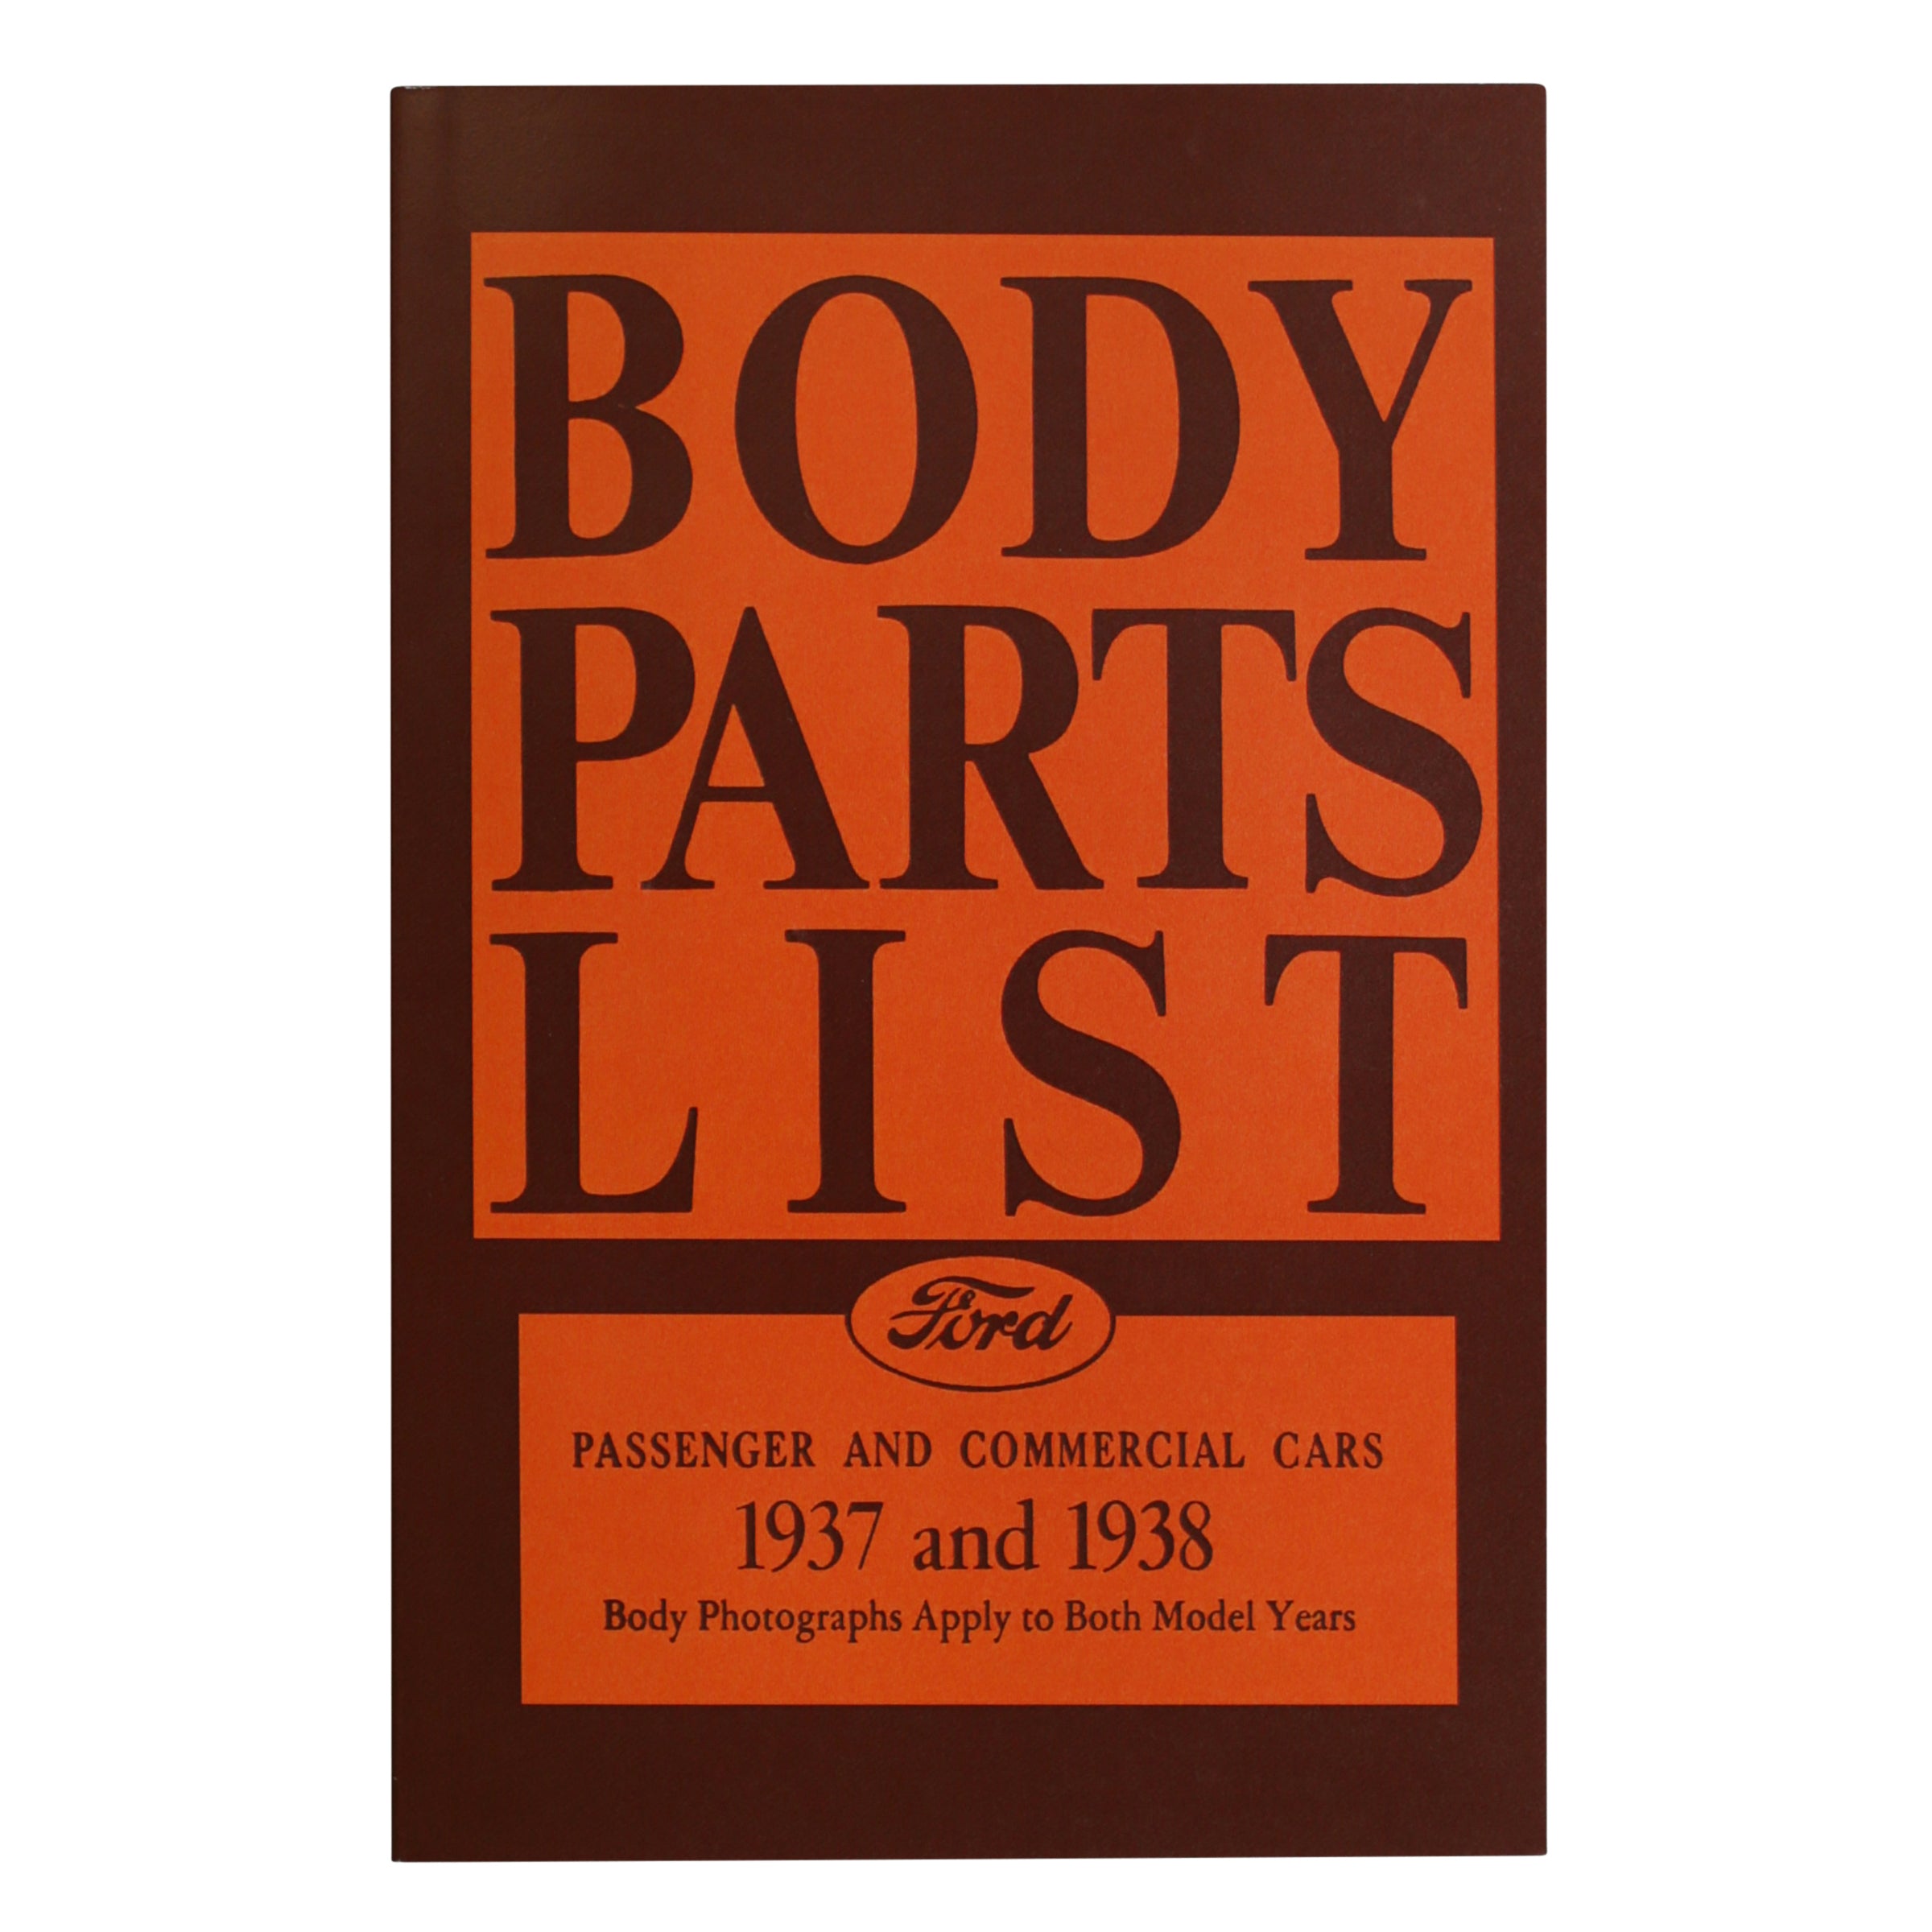 Ford Body Parts List • 1937-38 Ford